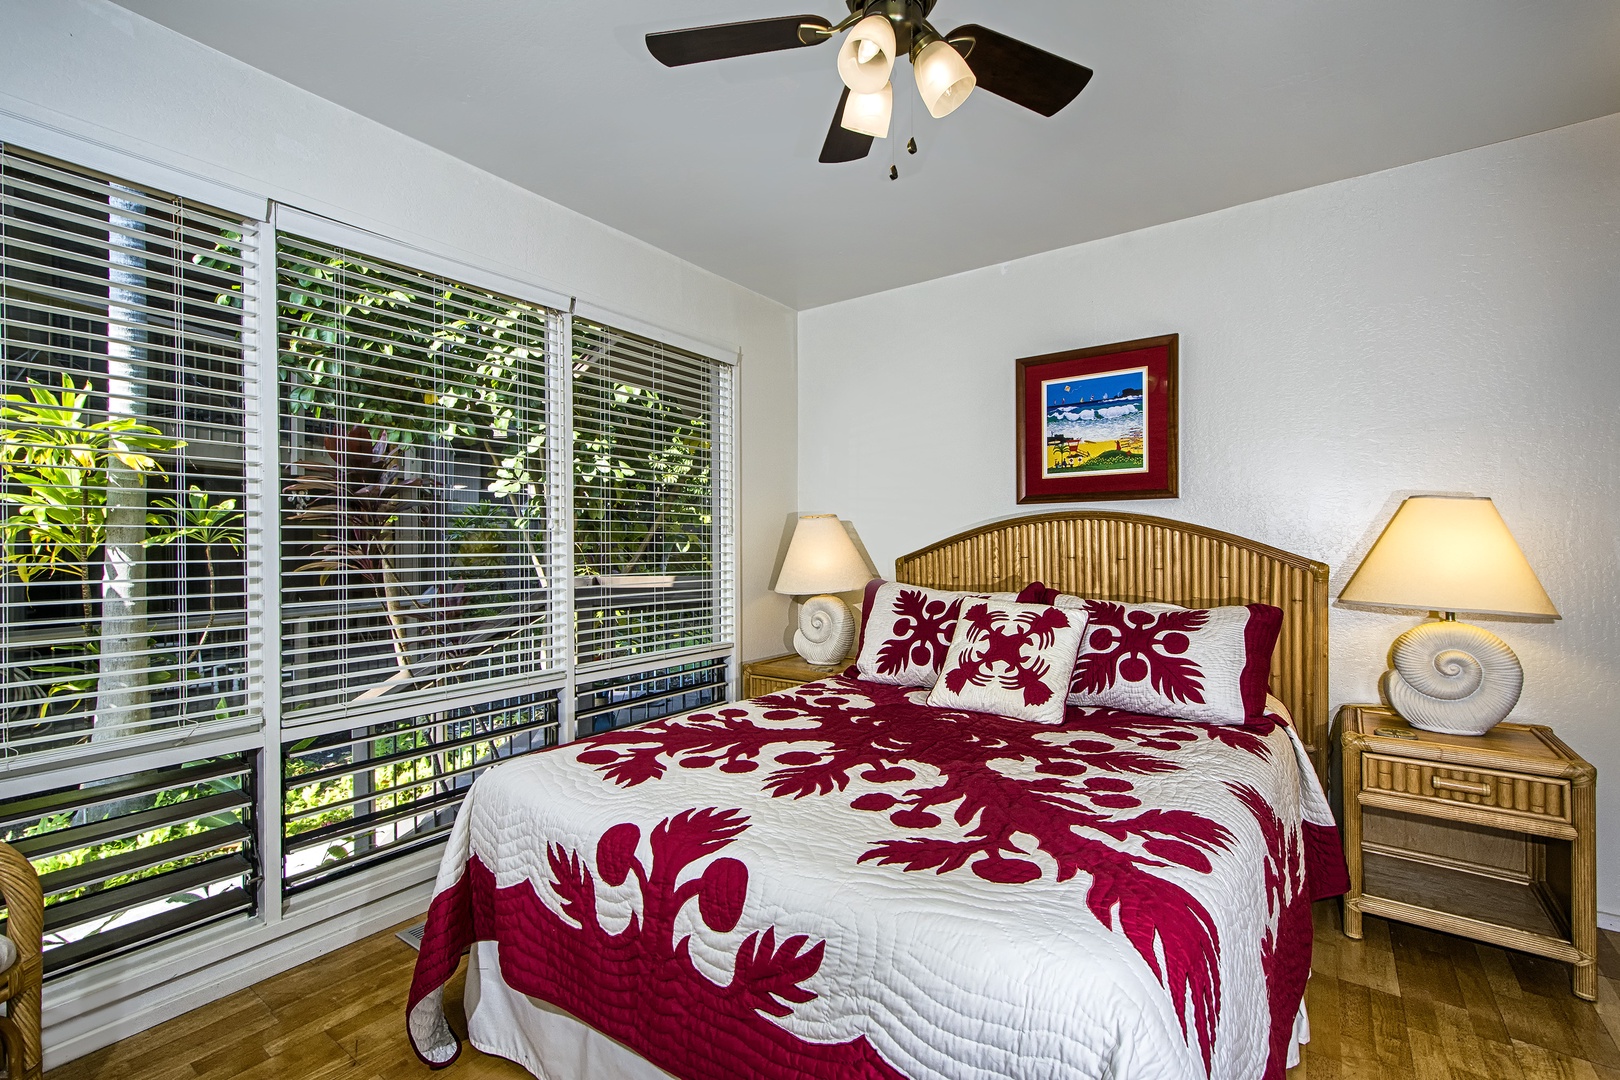 Kailua Kona Vacation Rentals, Kanaloa at Kona 701 - Guest bedroom equipped with Queen bed featuring central A/C